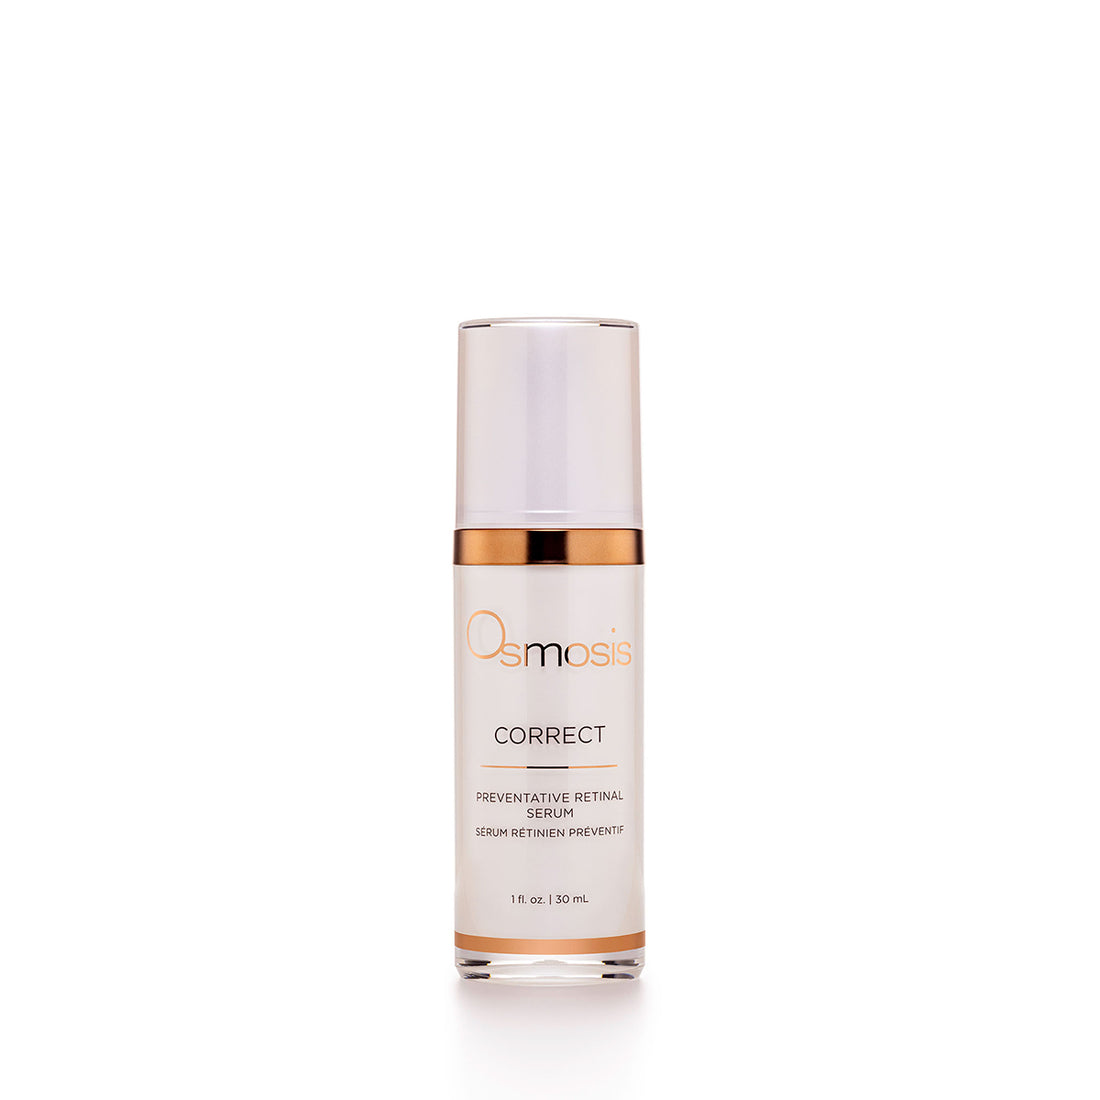 Osmosis Skincare Correct Serum is a potent vitamin A serum that will improve aging , fine lines and overall texture